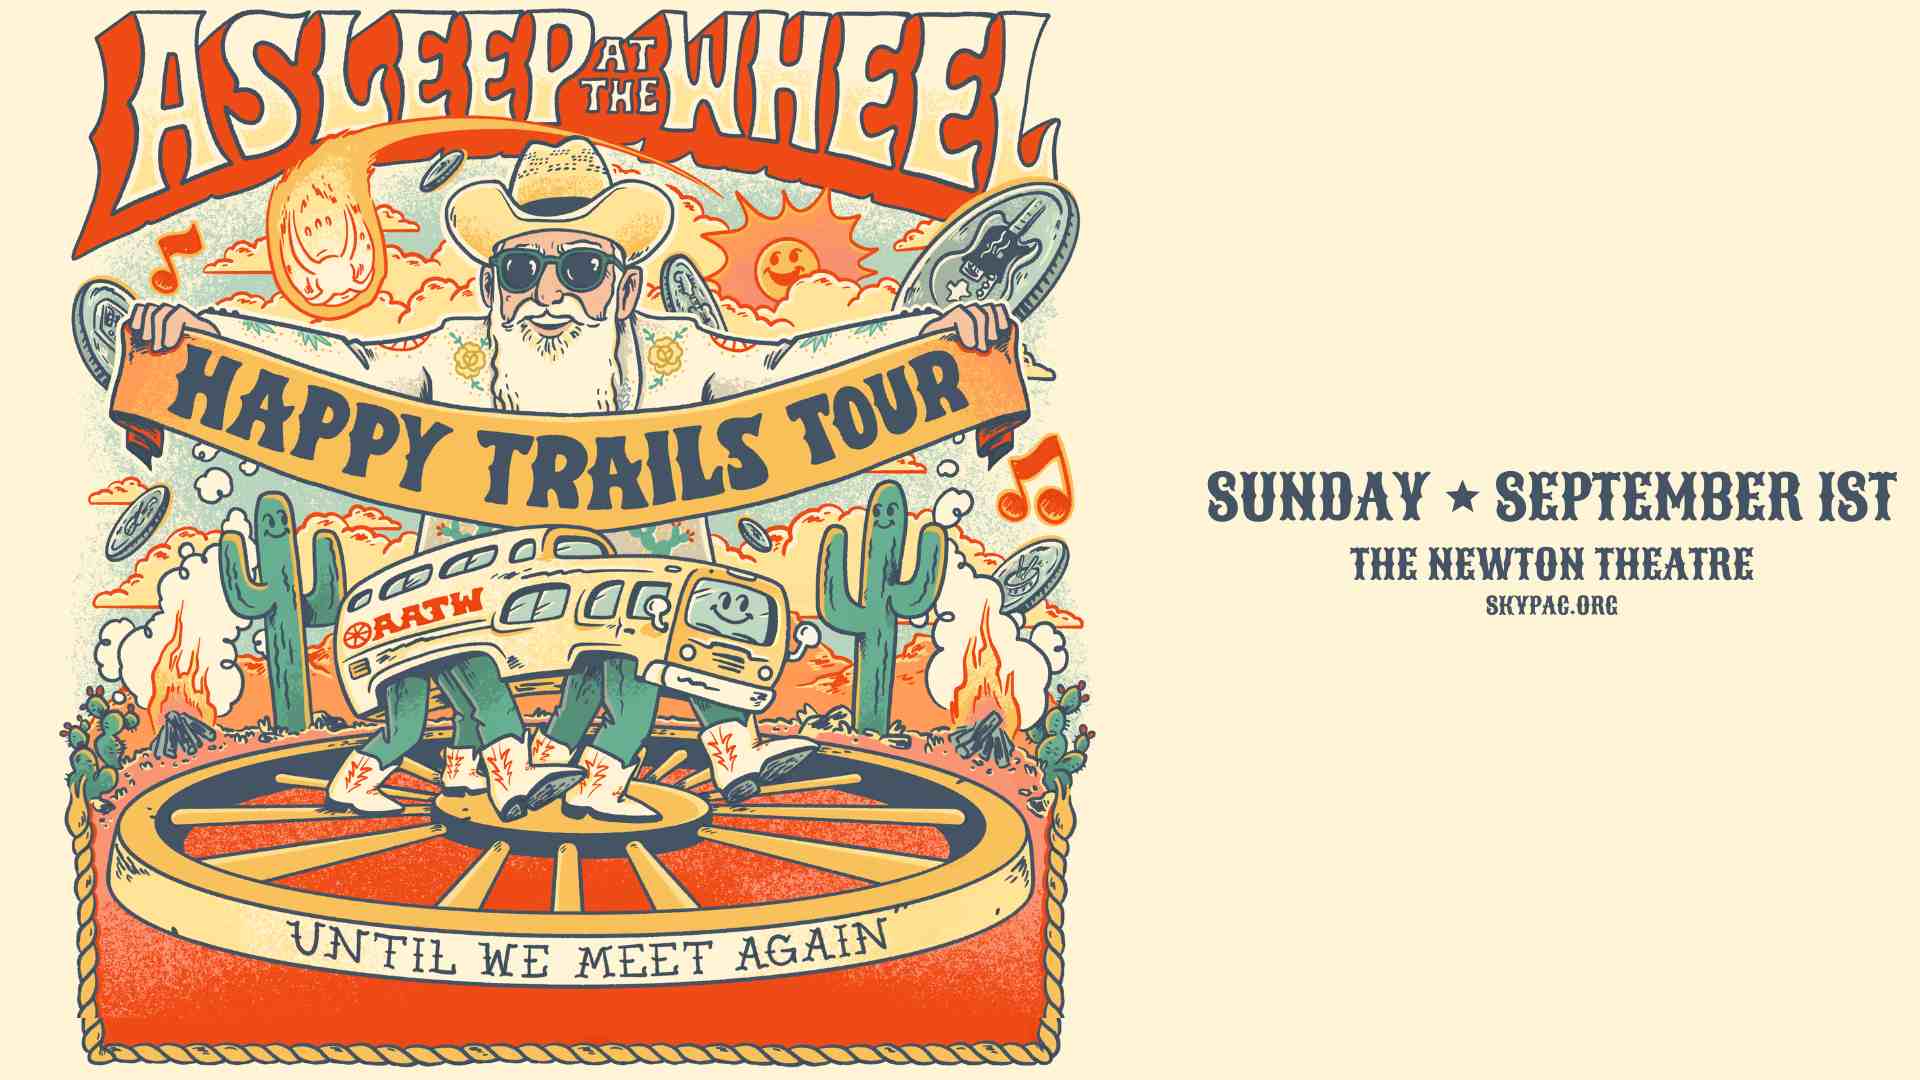 Asleep At The Wheel comes to The Newton Theatre on Sunday, September 1st.